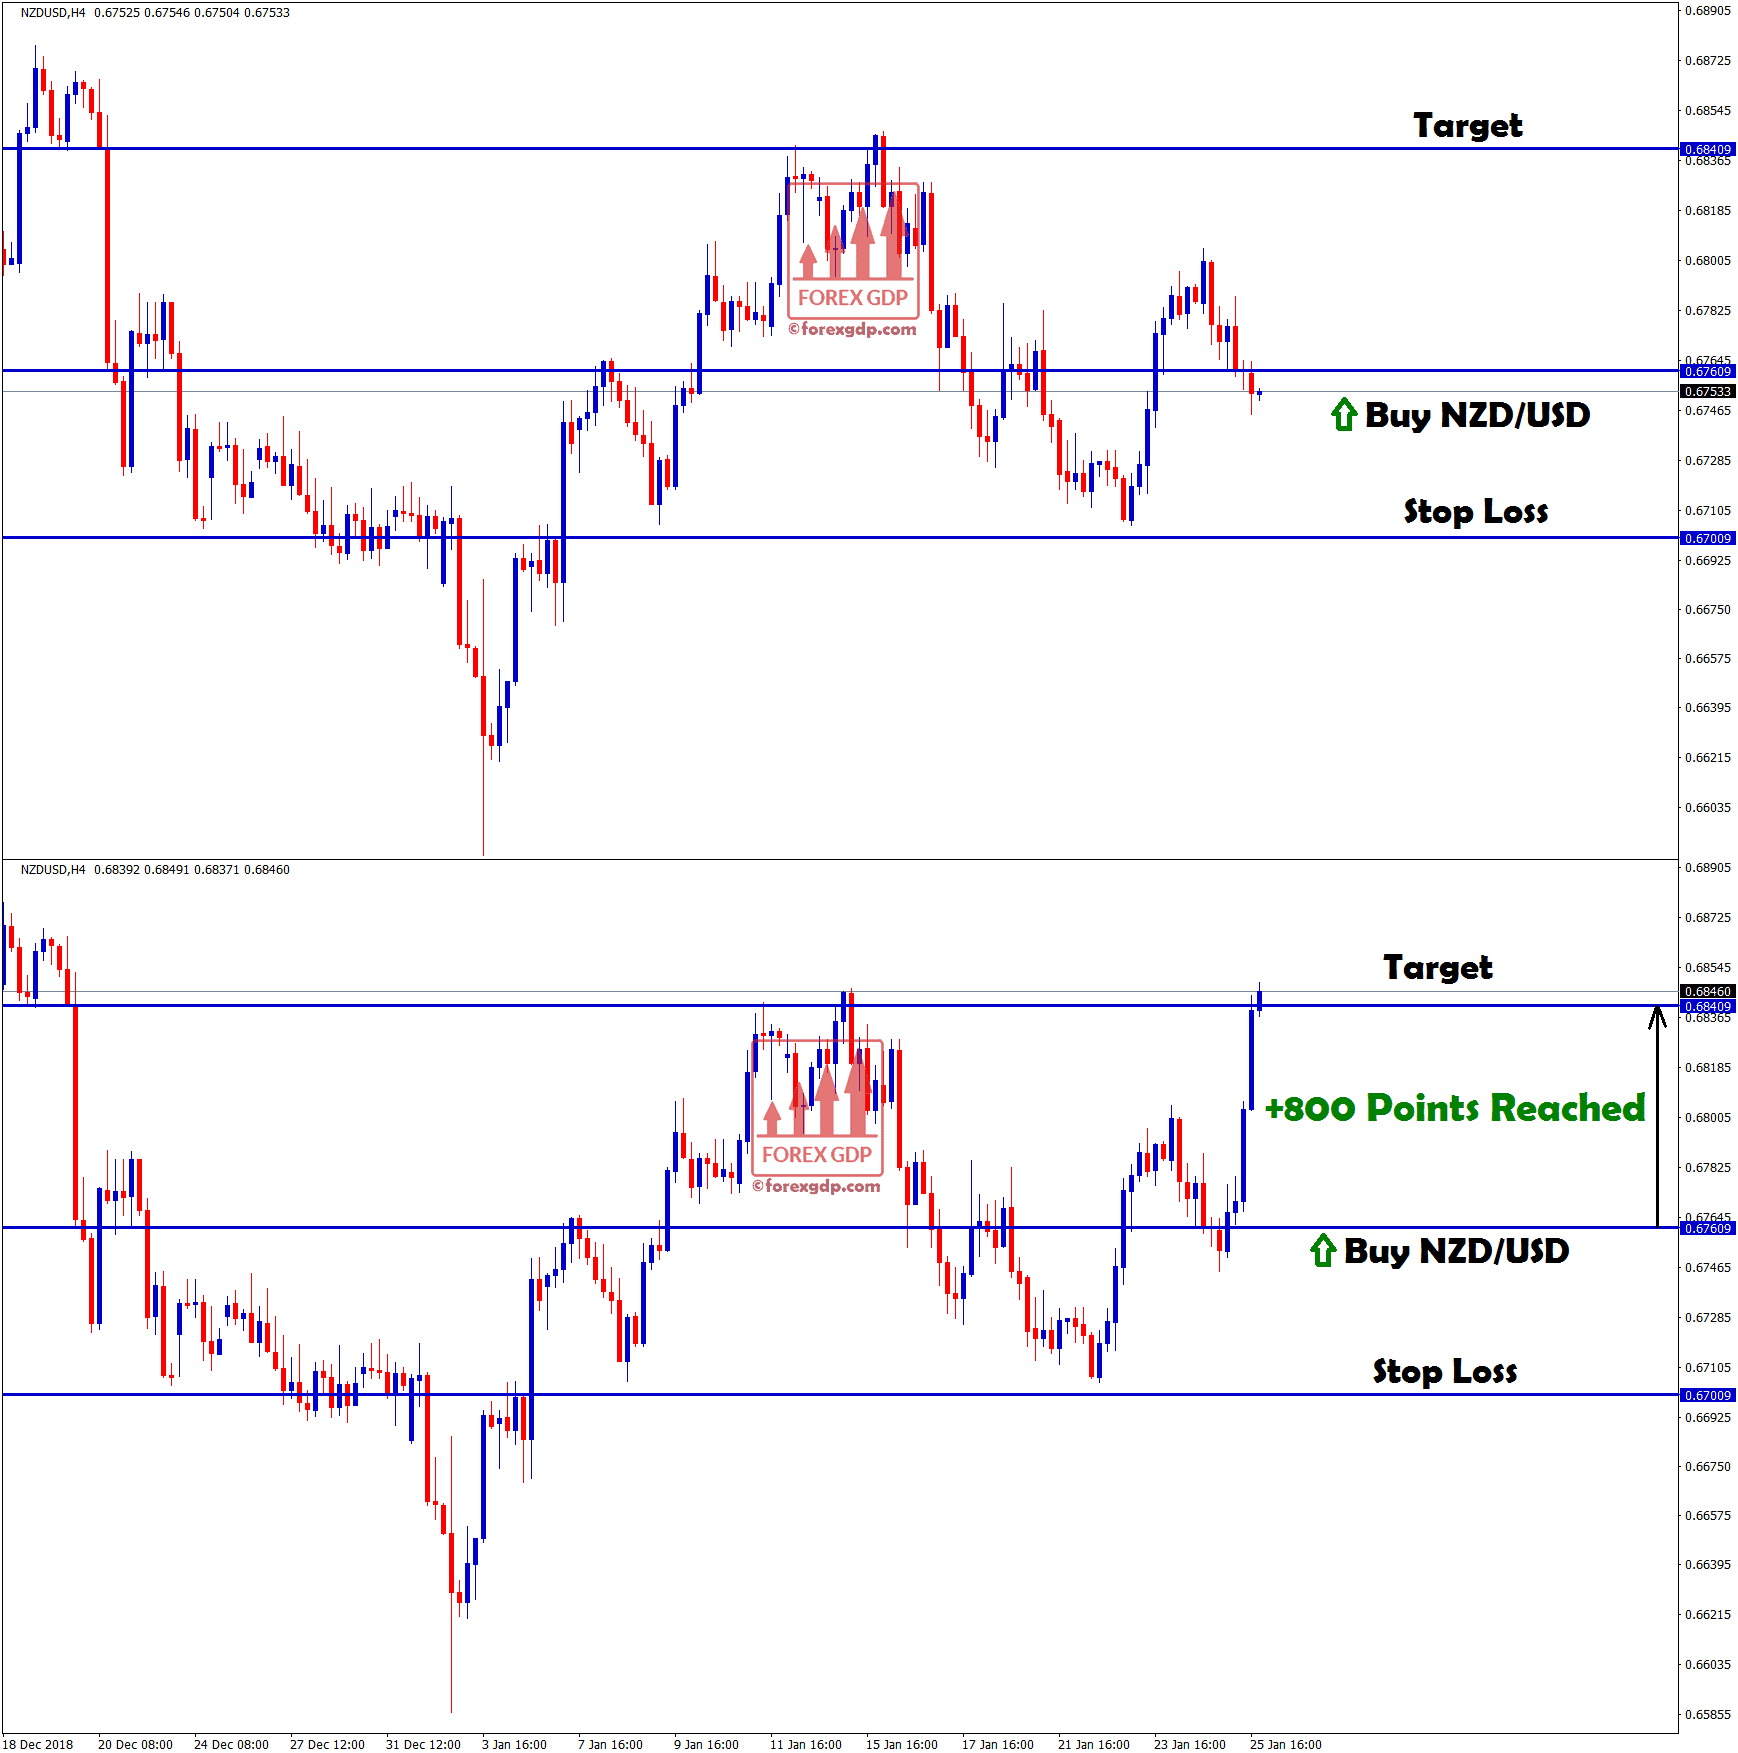 nzdusd touched target with +800 points